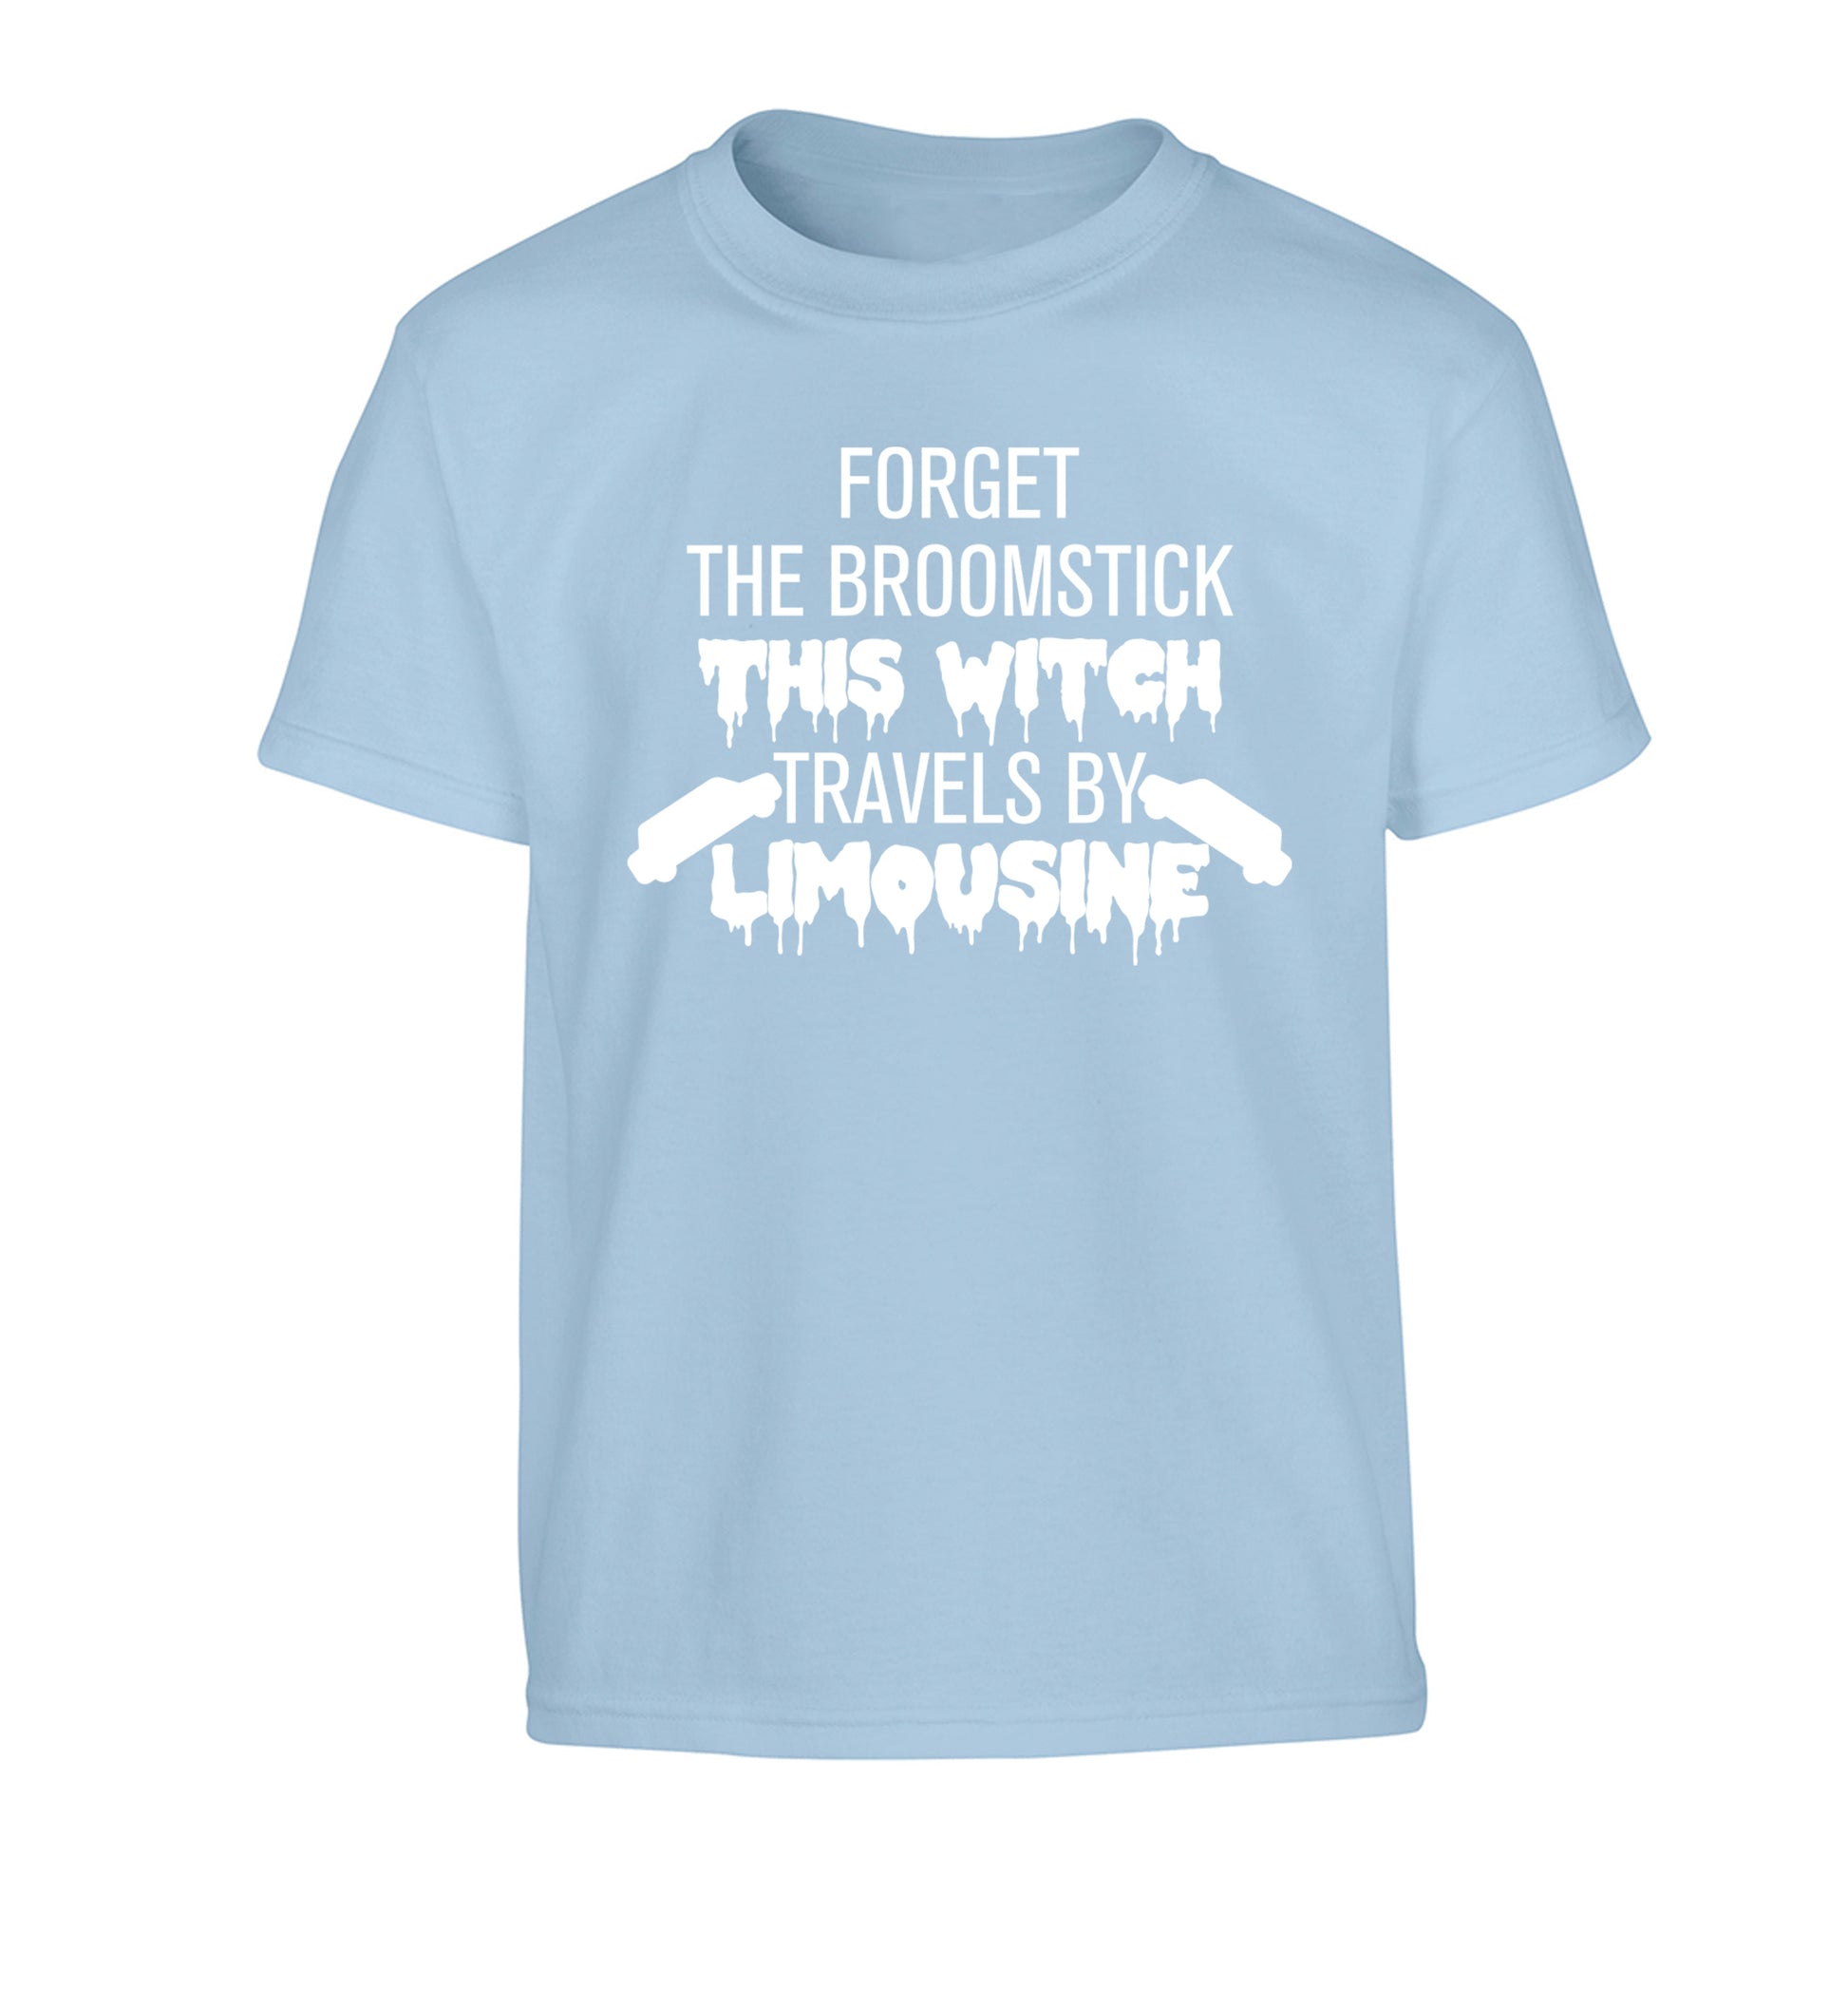 Forget the broomstick this witch travels by limousine Children's light blue Tshirt 12-14 Years